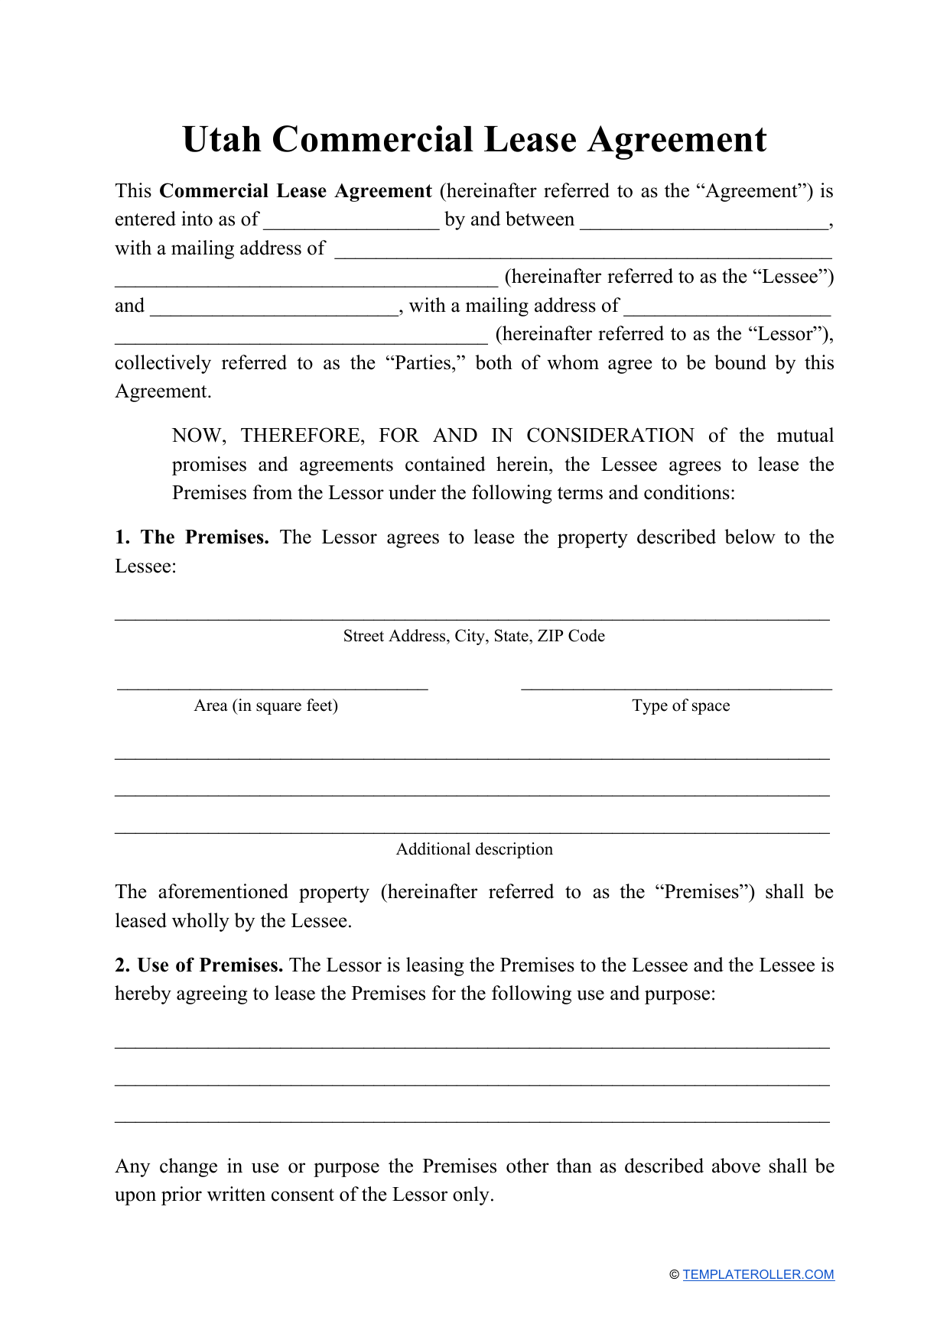 Commercial Lease Agreement Template - Utah, Page 1